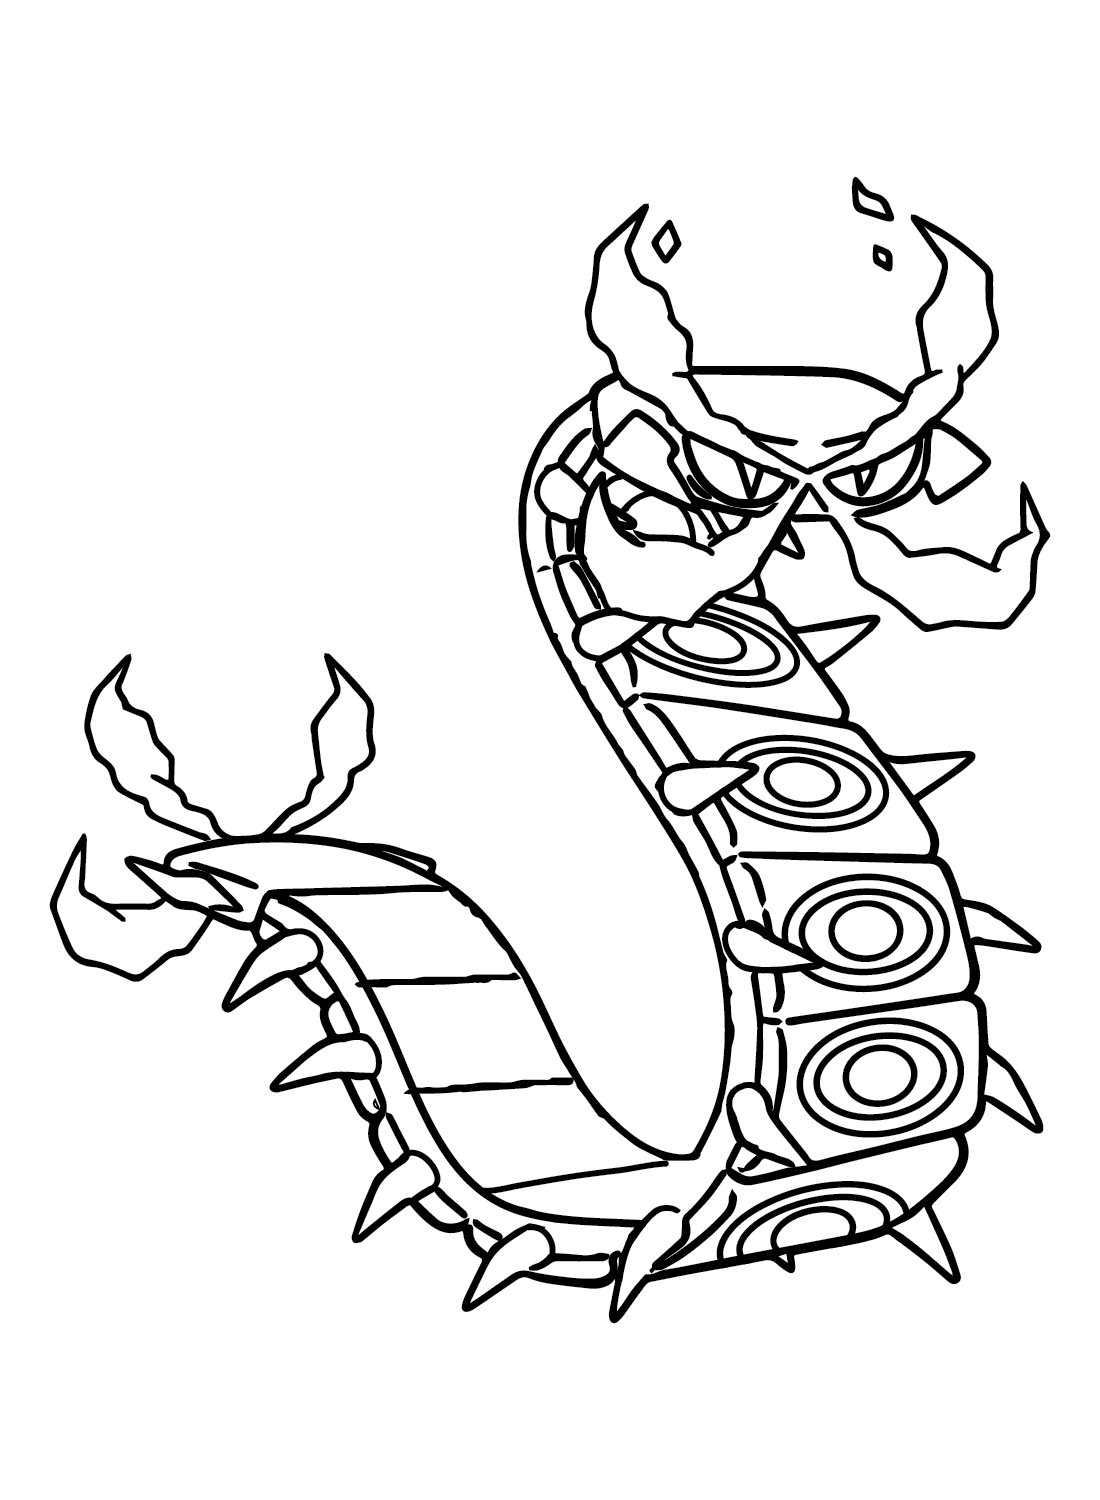 Evolution of Sizzlipede Coloring Page